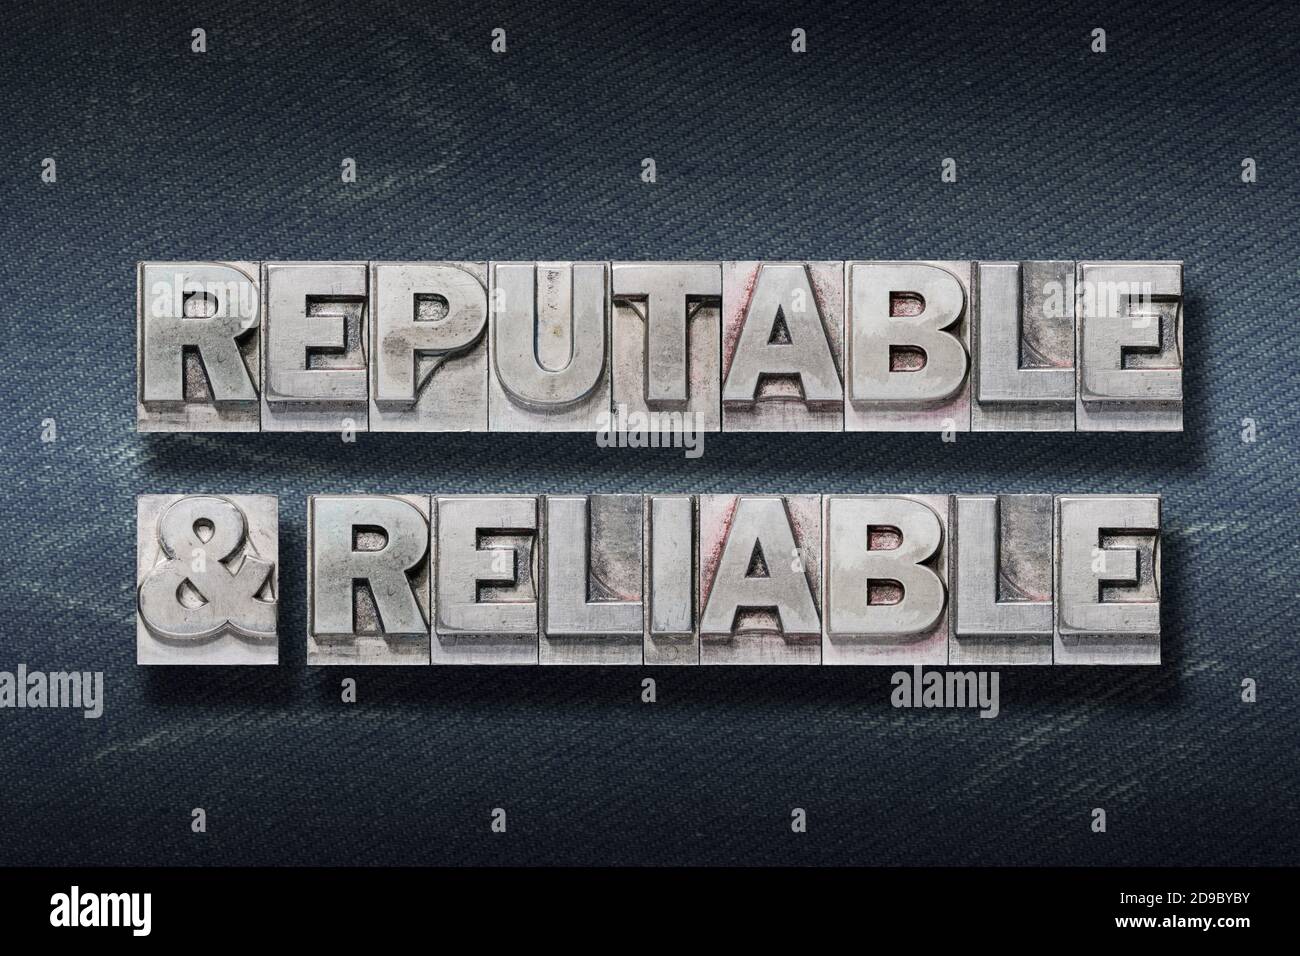 reputable and reliable phrase made from metallic letterpress on dark jeans background Stock Photo